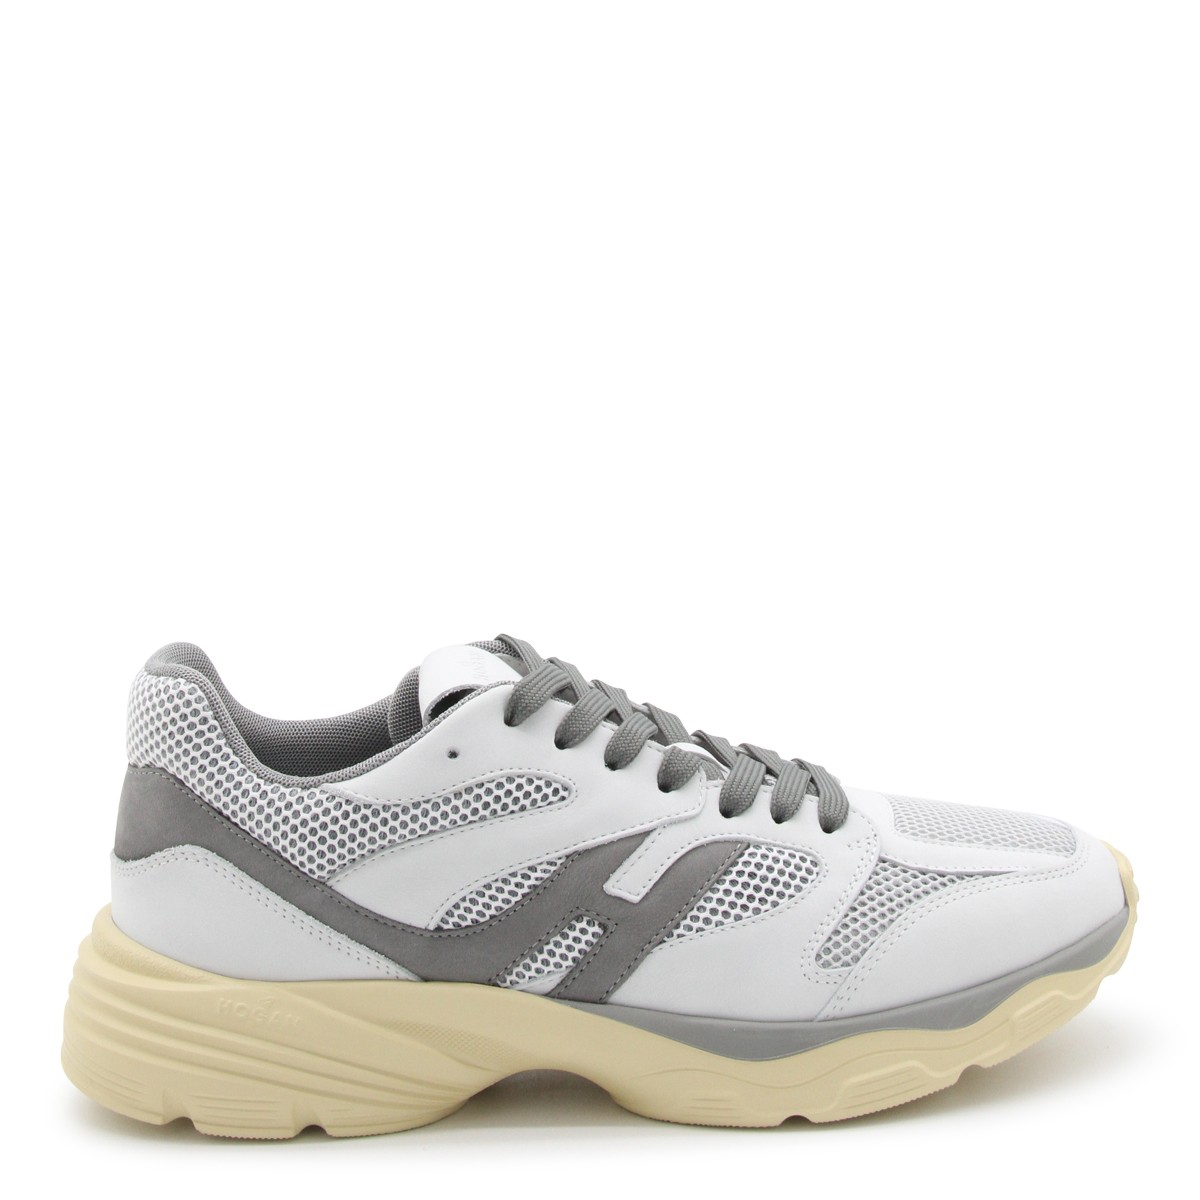 WHITE GREY LEATHER H665 SNEAKERS